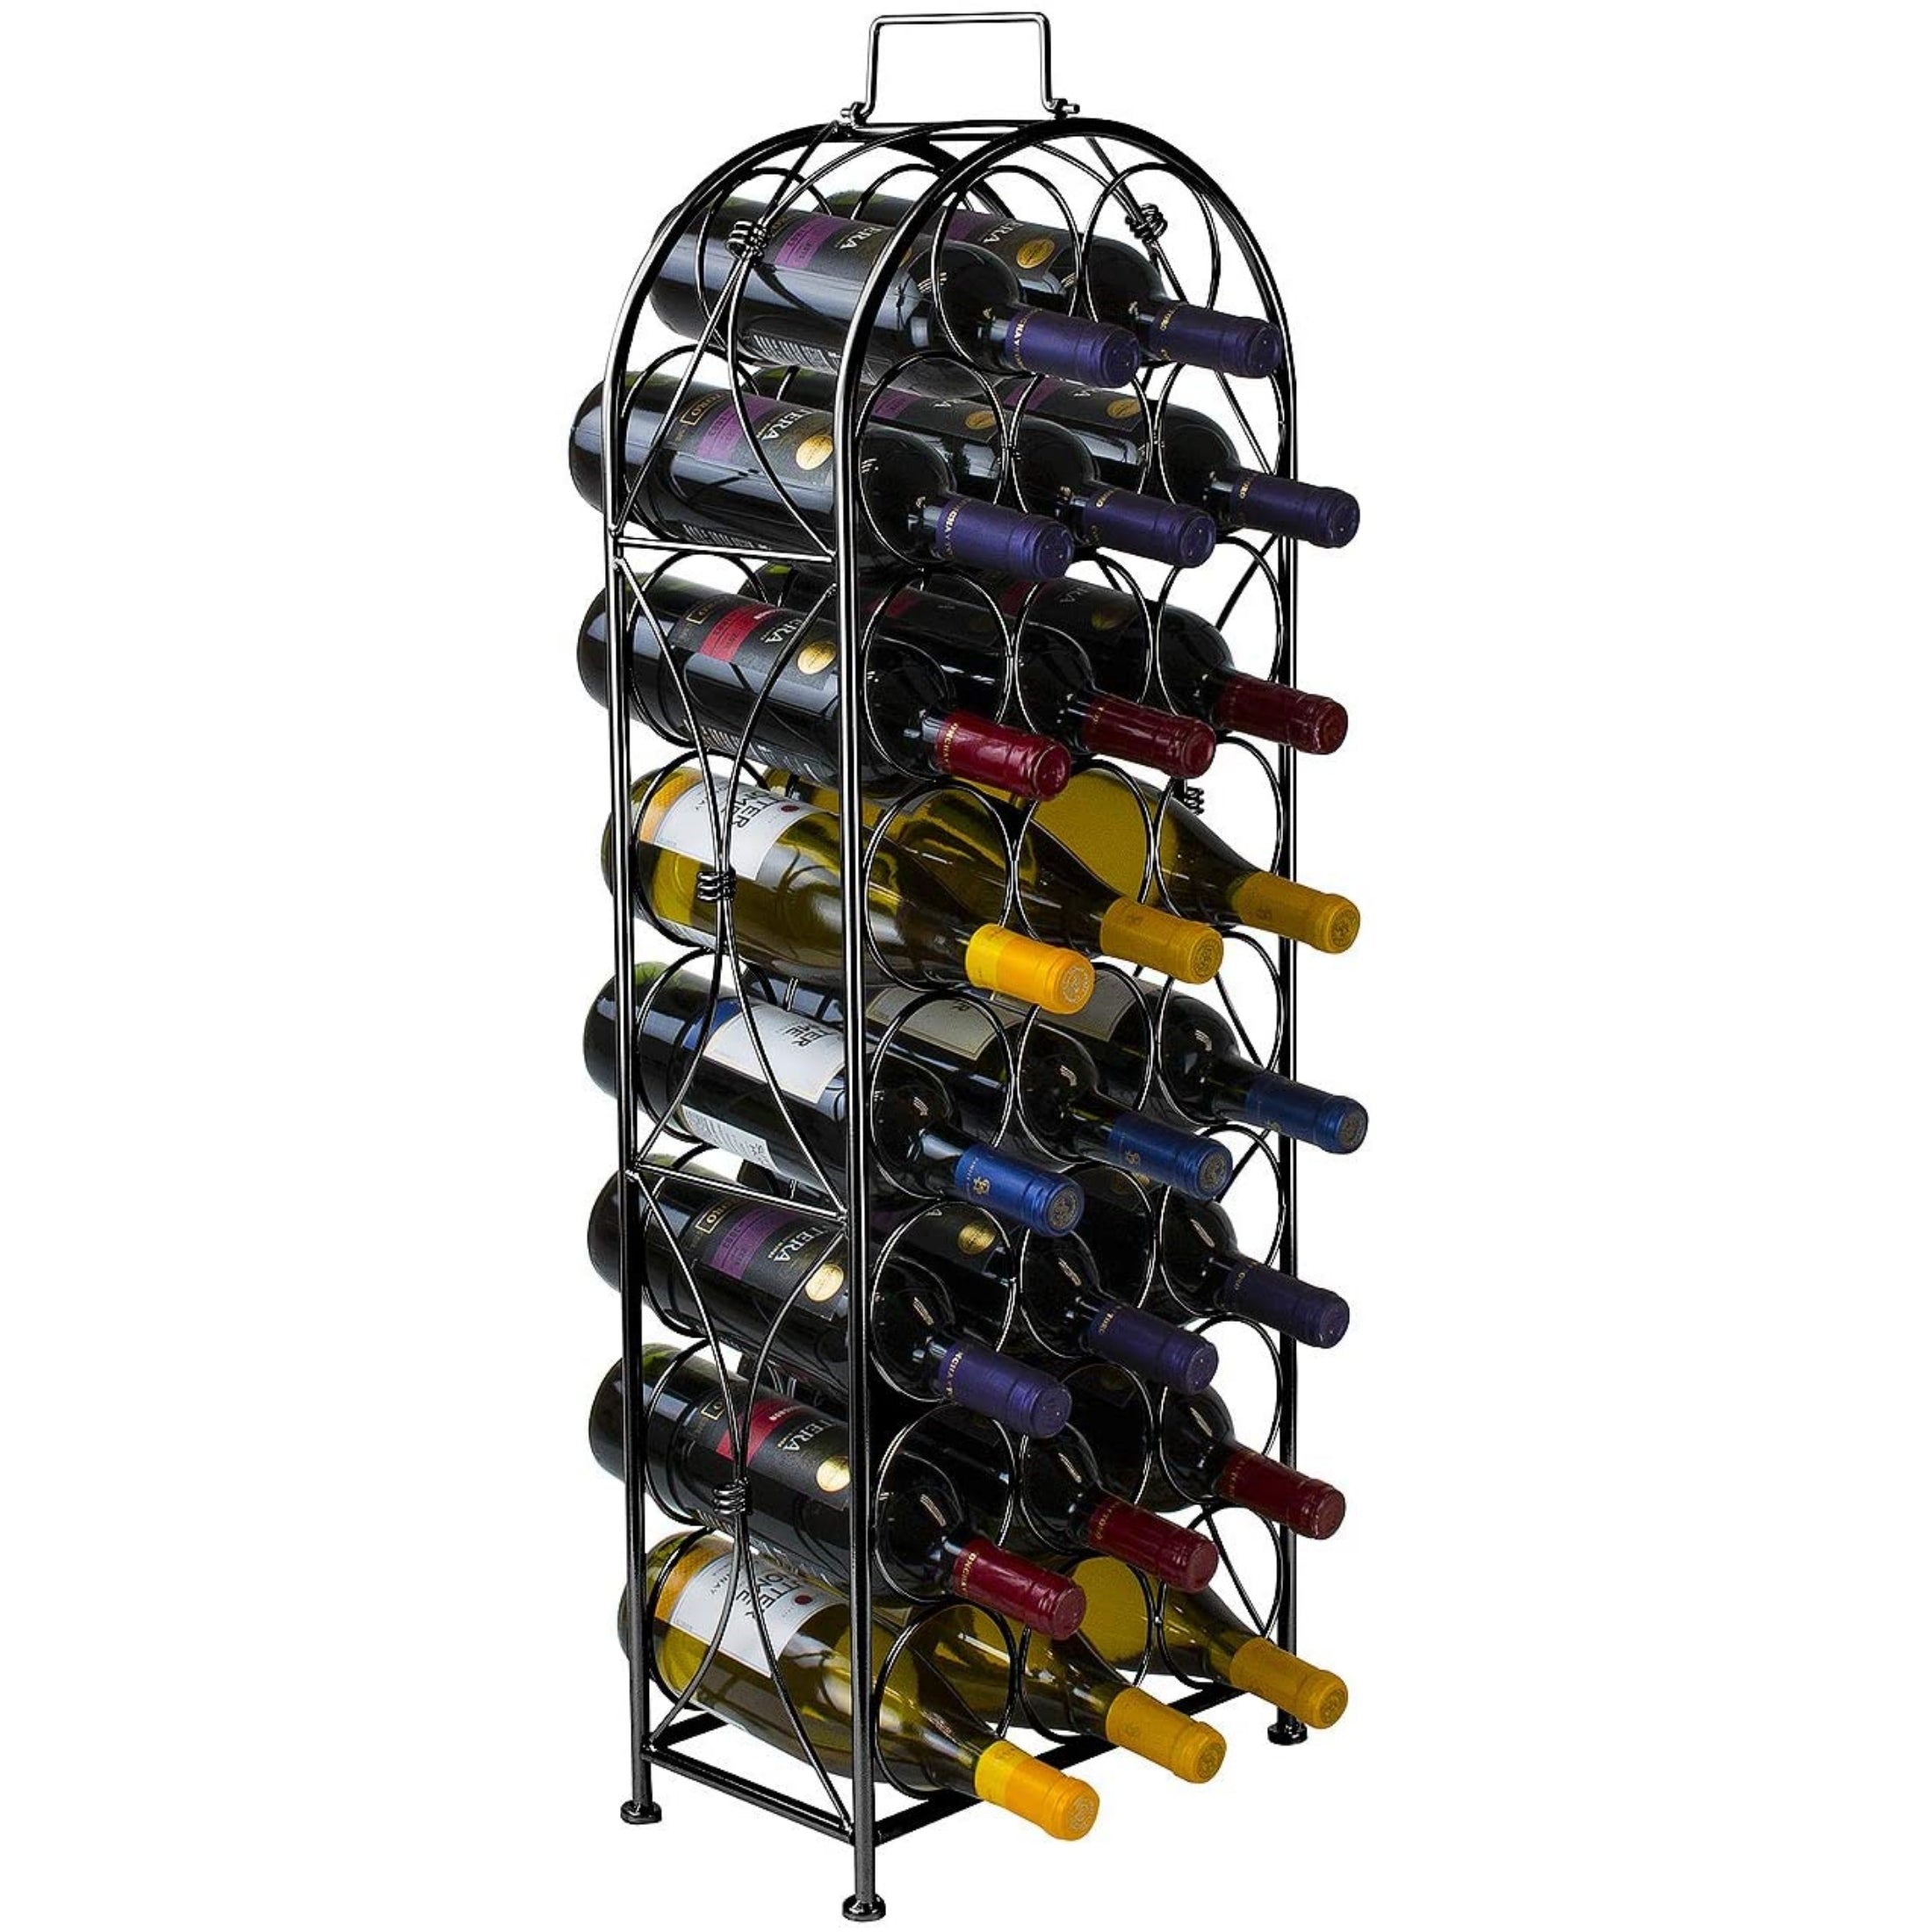 French Style Bordeaux Chateau Wine Rack (Holds 23 Bottles)